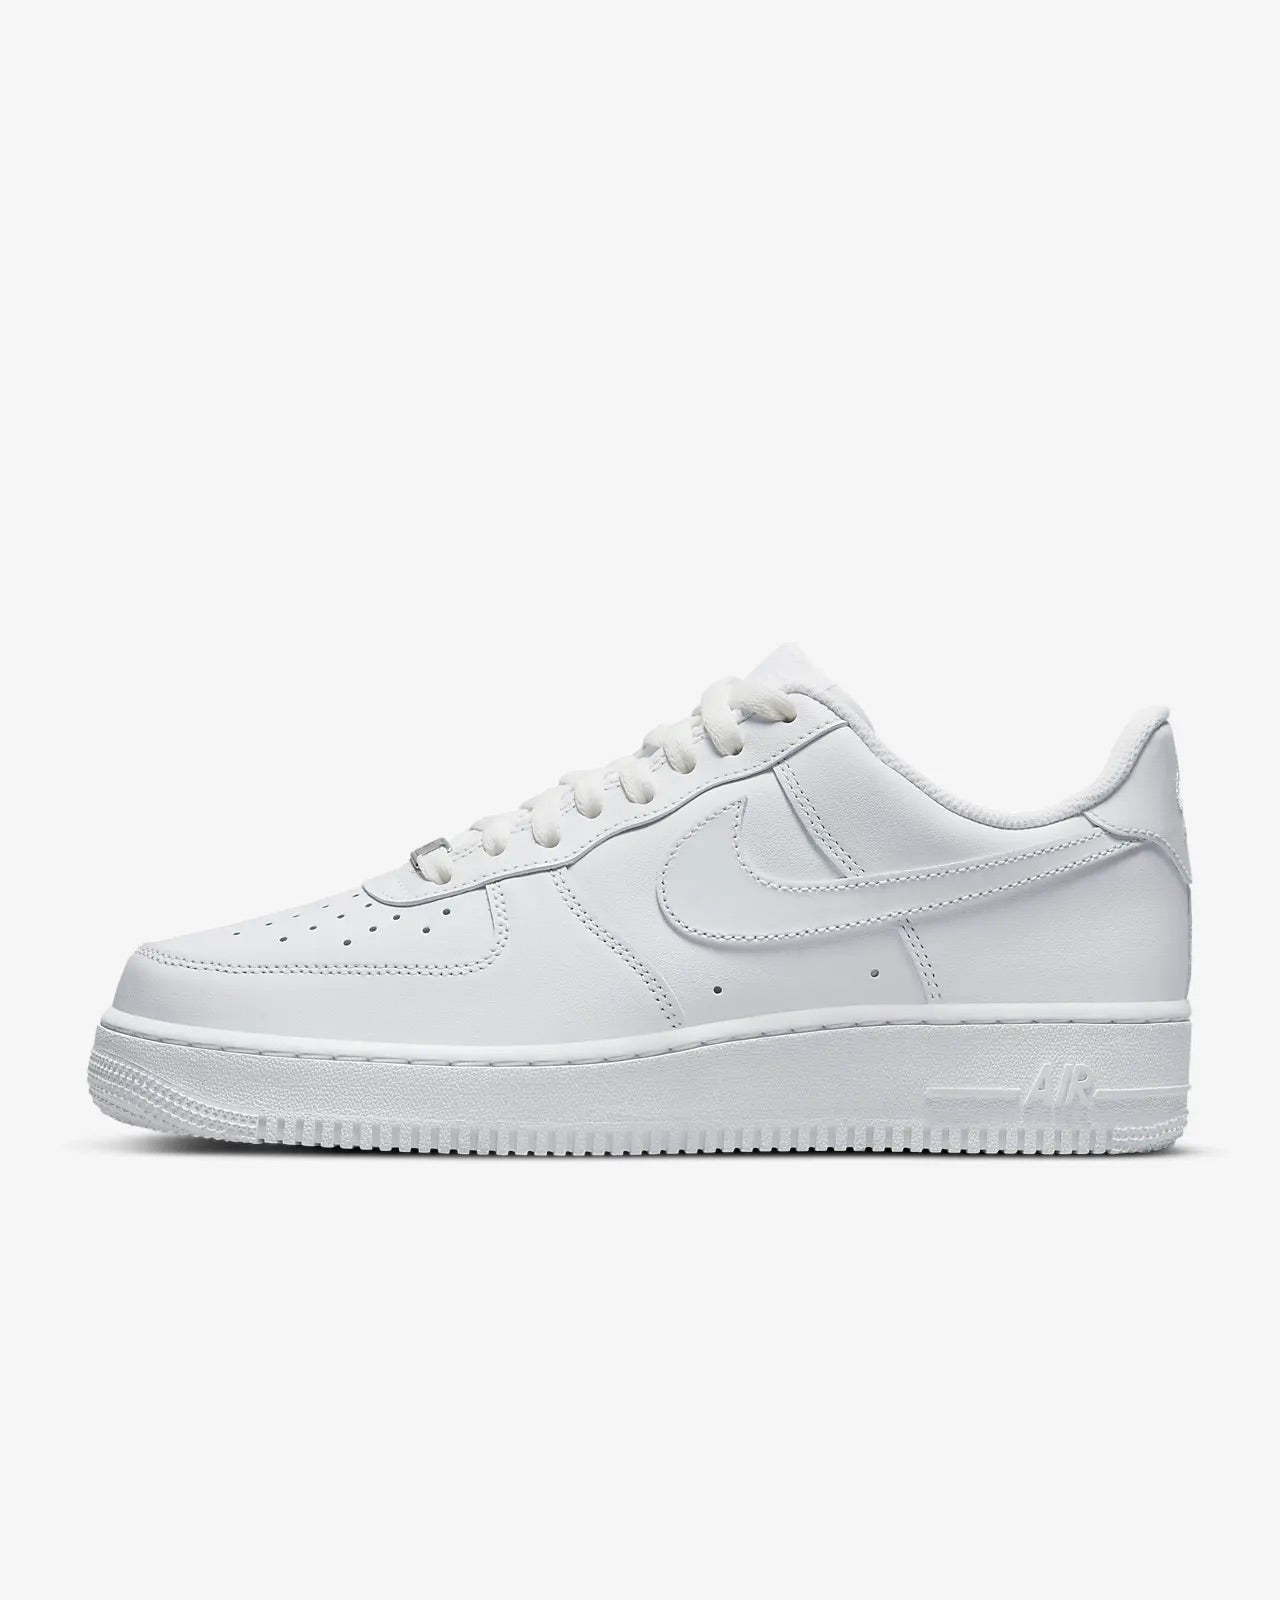 Nike Air Force 1 '07 Low Men's Trainers